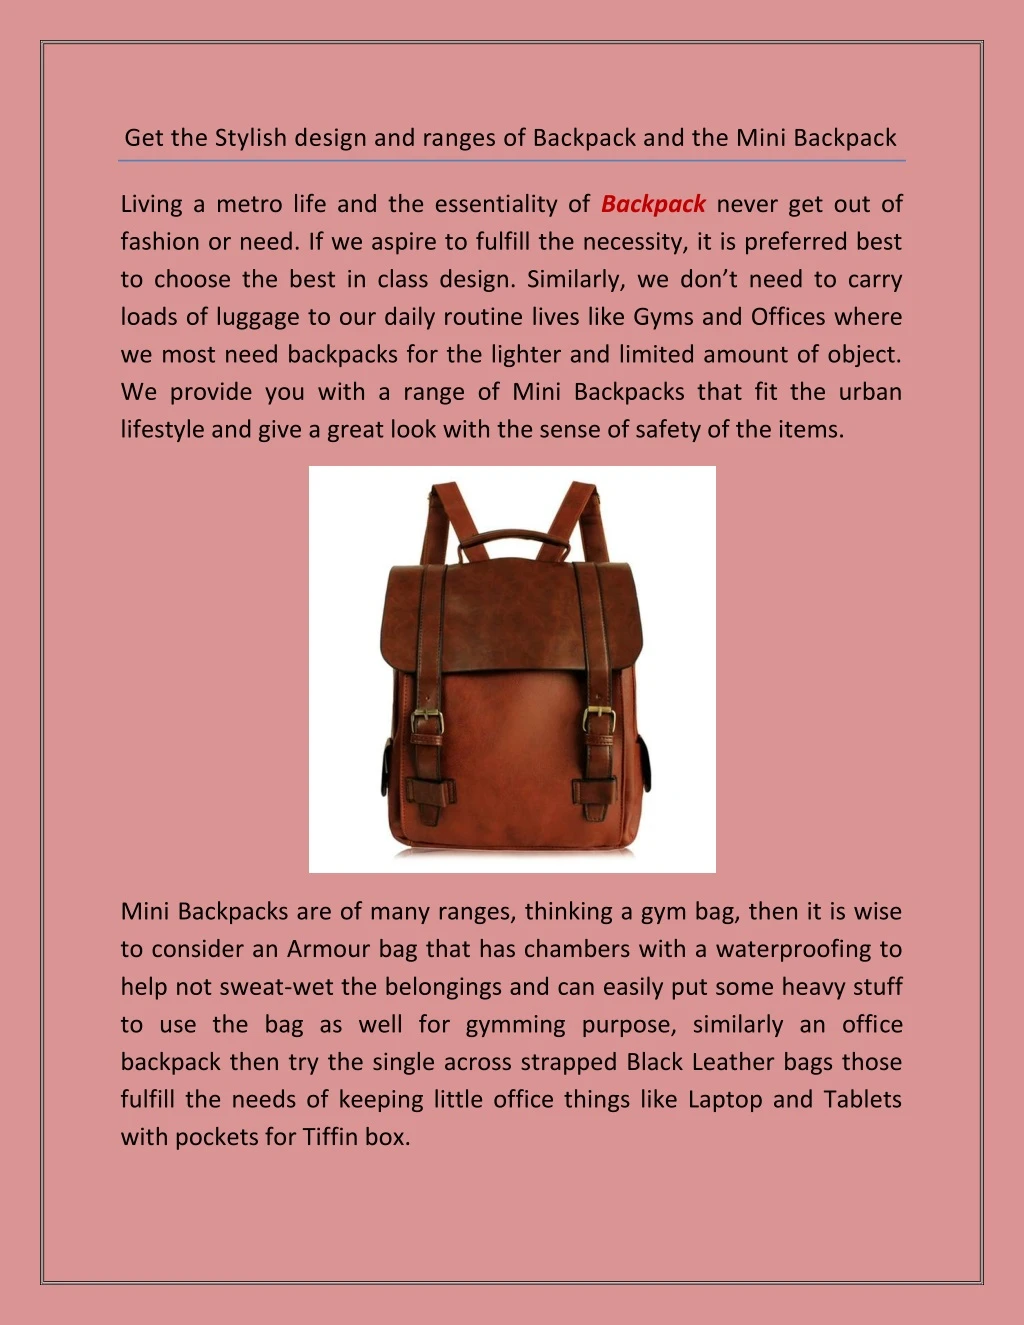 get the stylish design and ranges of backpack